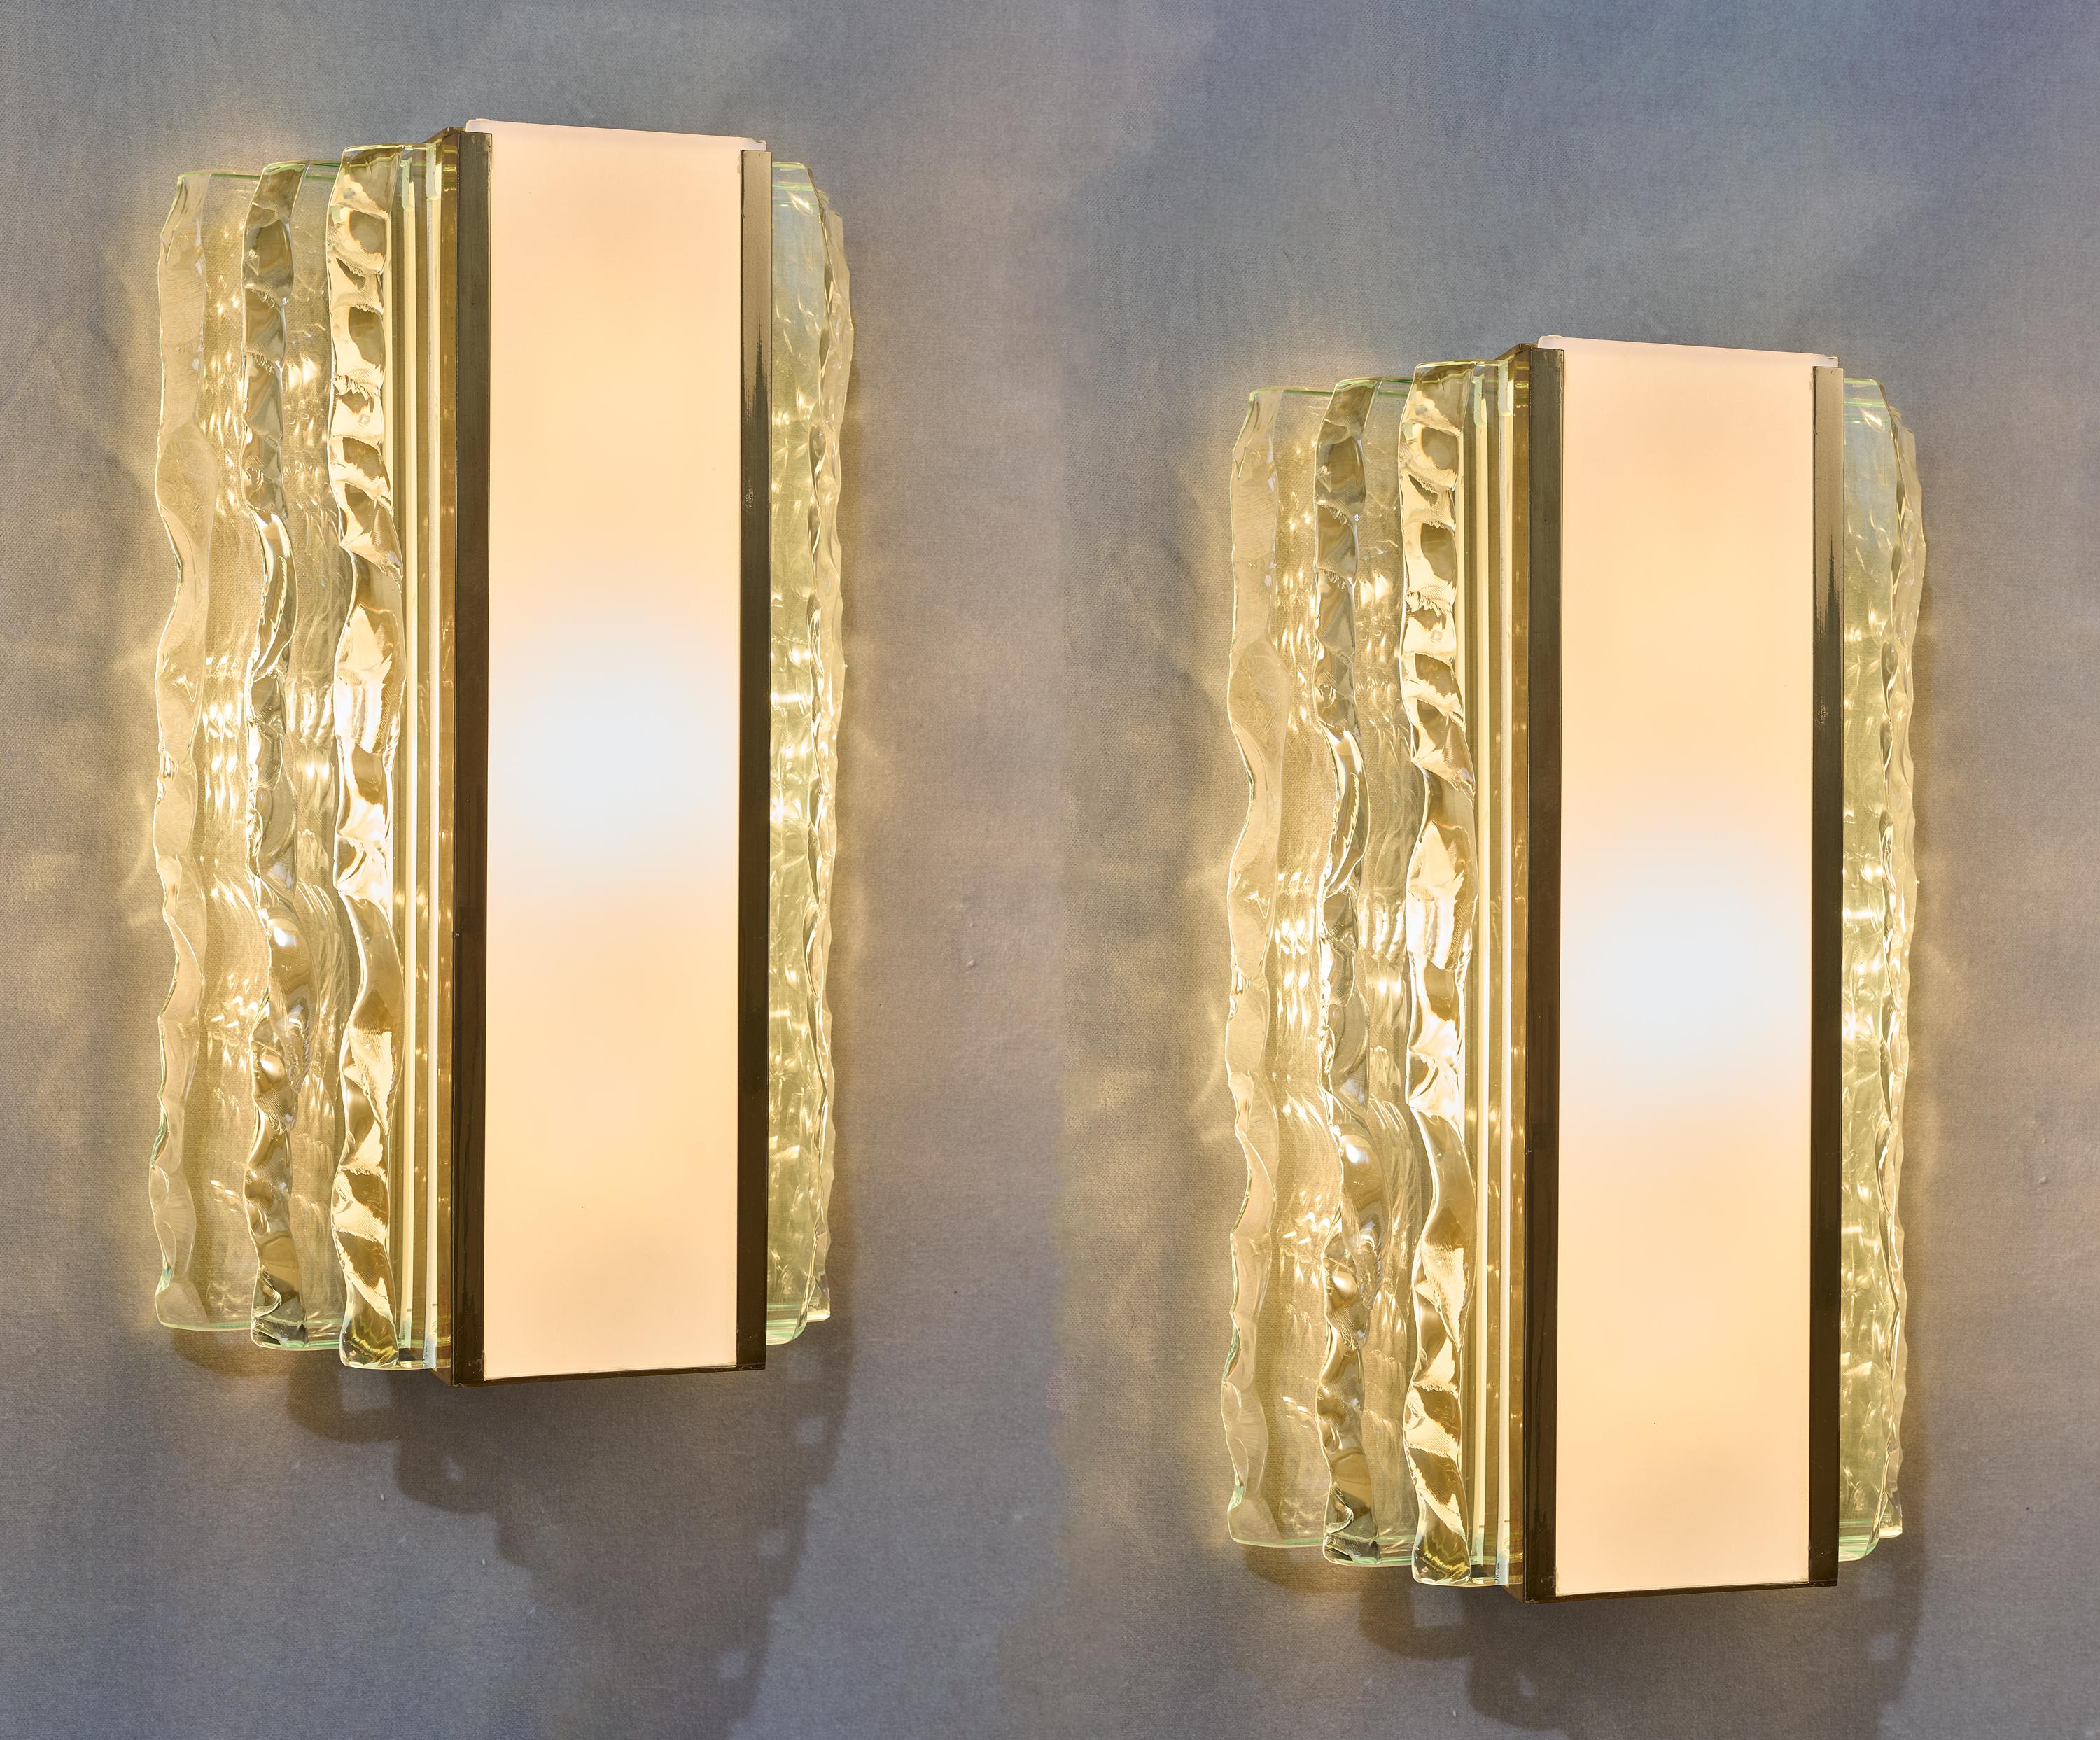 Max Ingrand (1908 - 1969) for Fontana Arte 

A striking pair of long rectangular sconces by Max Ingrand for Fontana Arte, in chiseled crystal and white glass on brass mounts. Three rows of exceptionally thick, luminous crystal slabs with wavy,